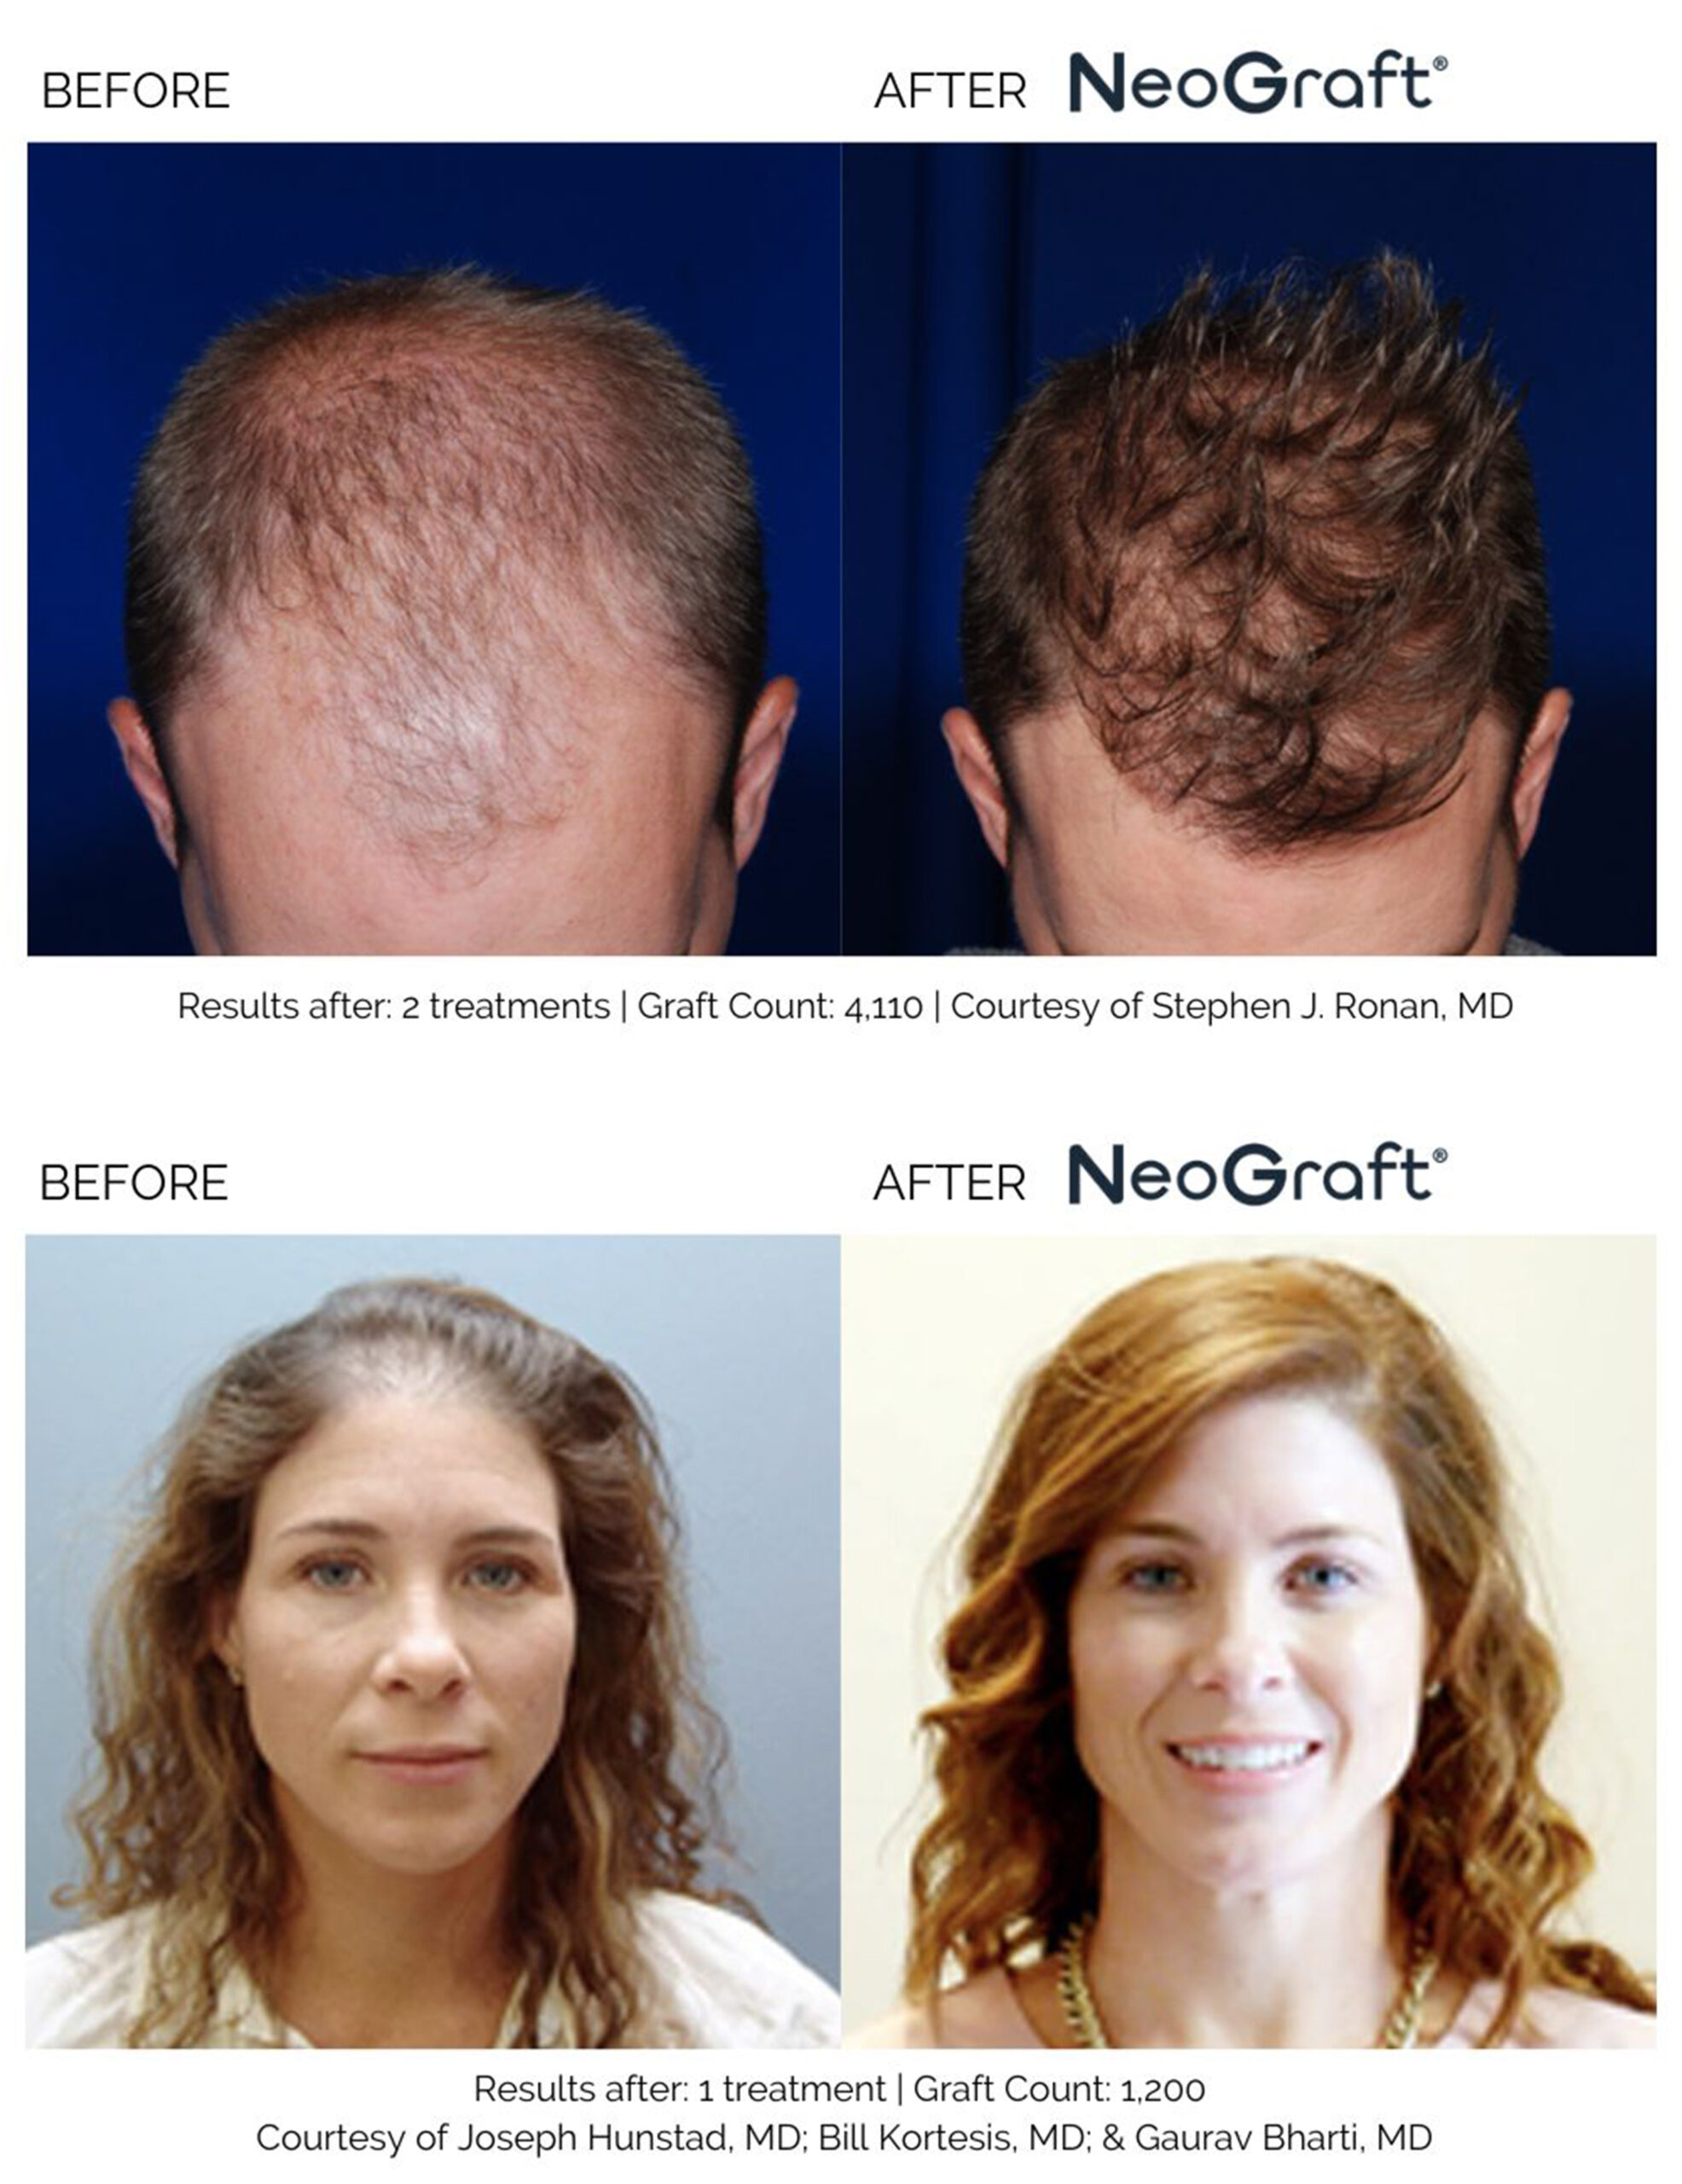 Man and woman before photos showing receding hair compared to after NeoGraft hair transplant restoring a full head of hair.